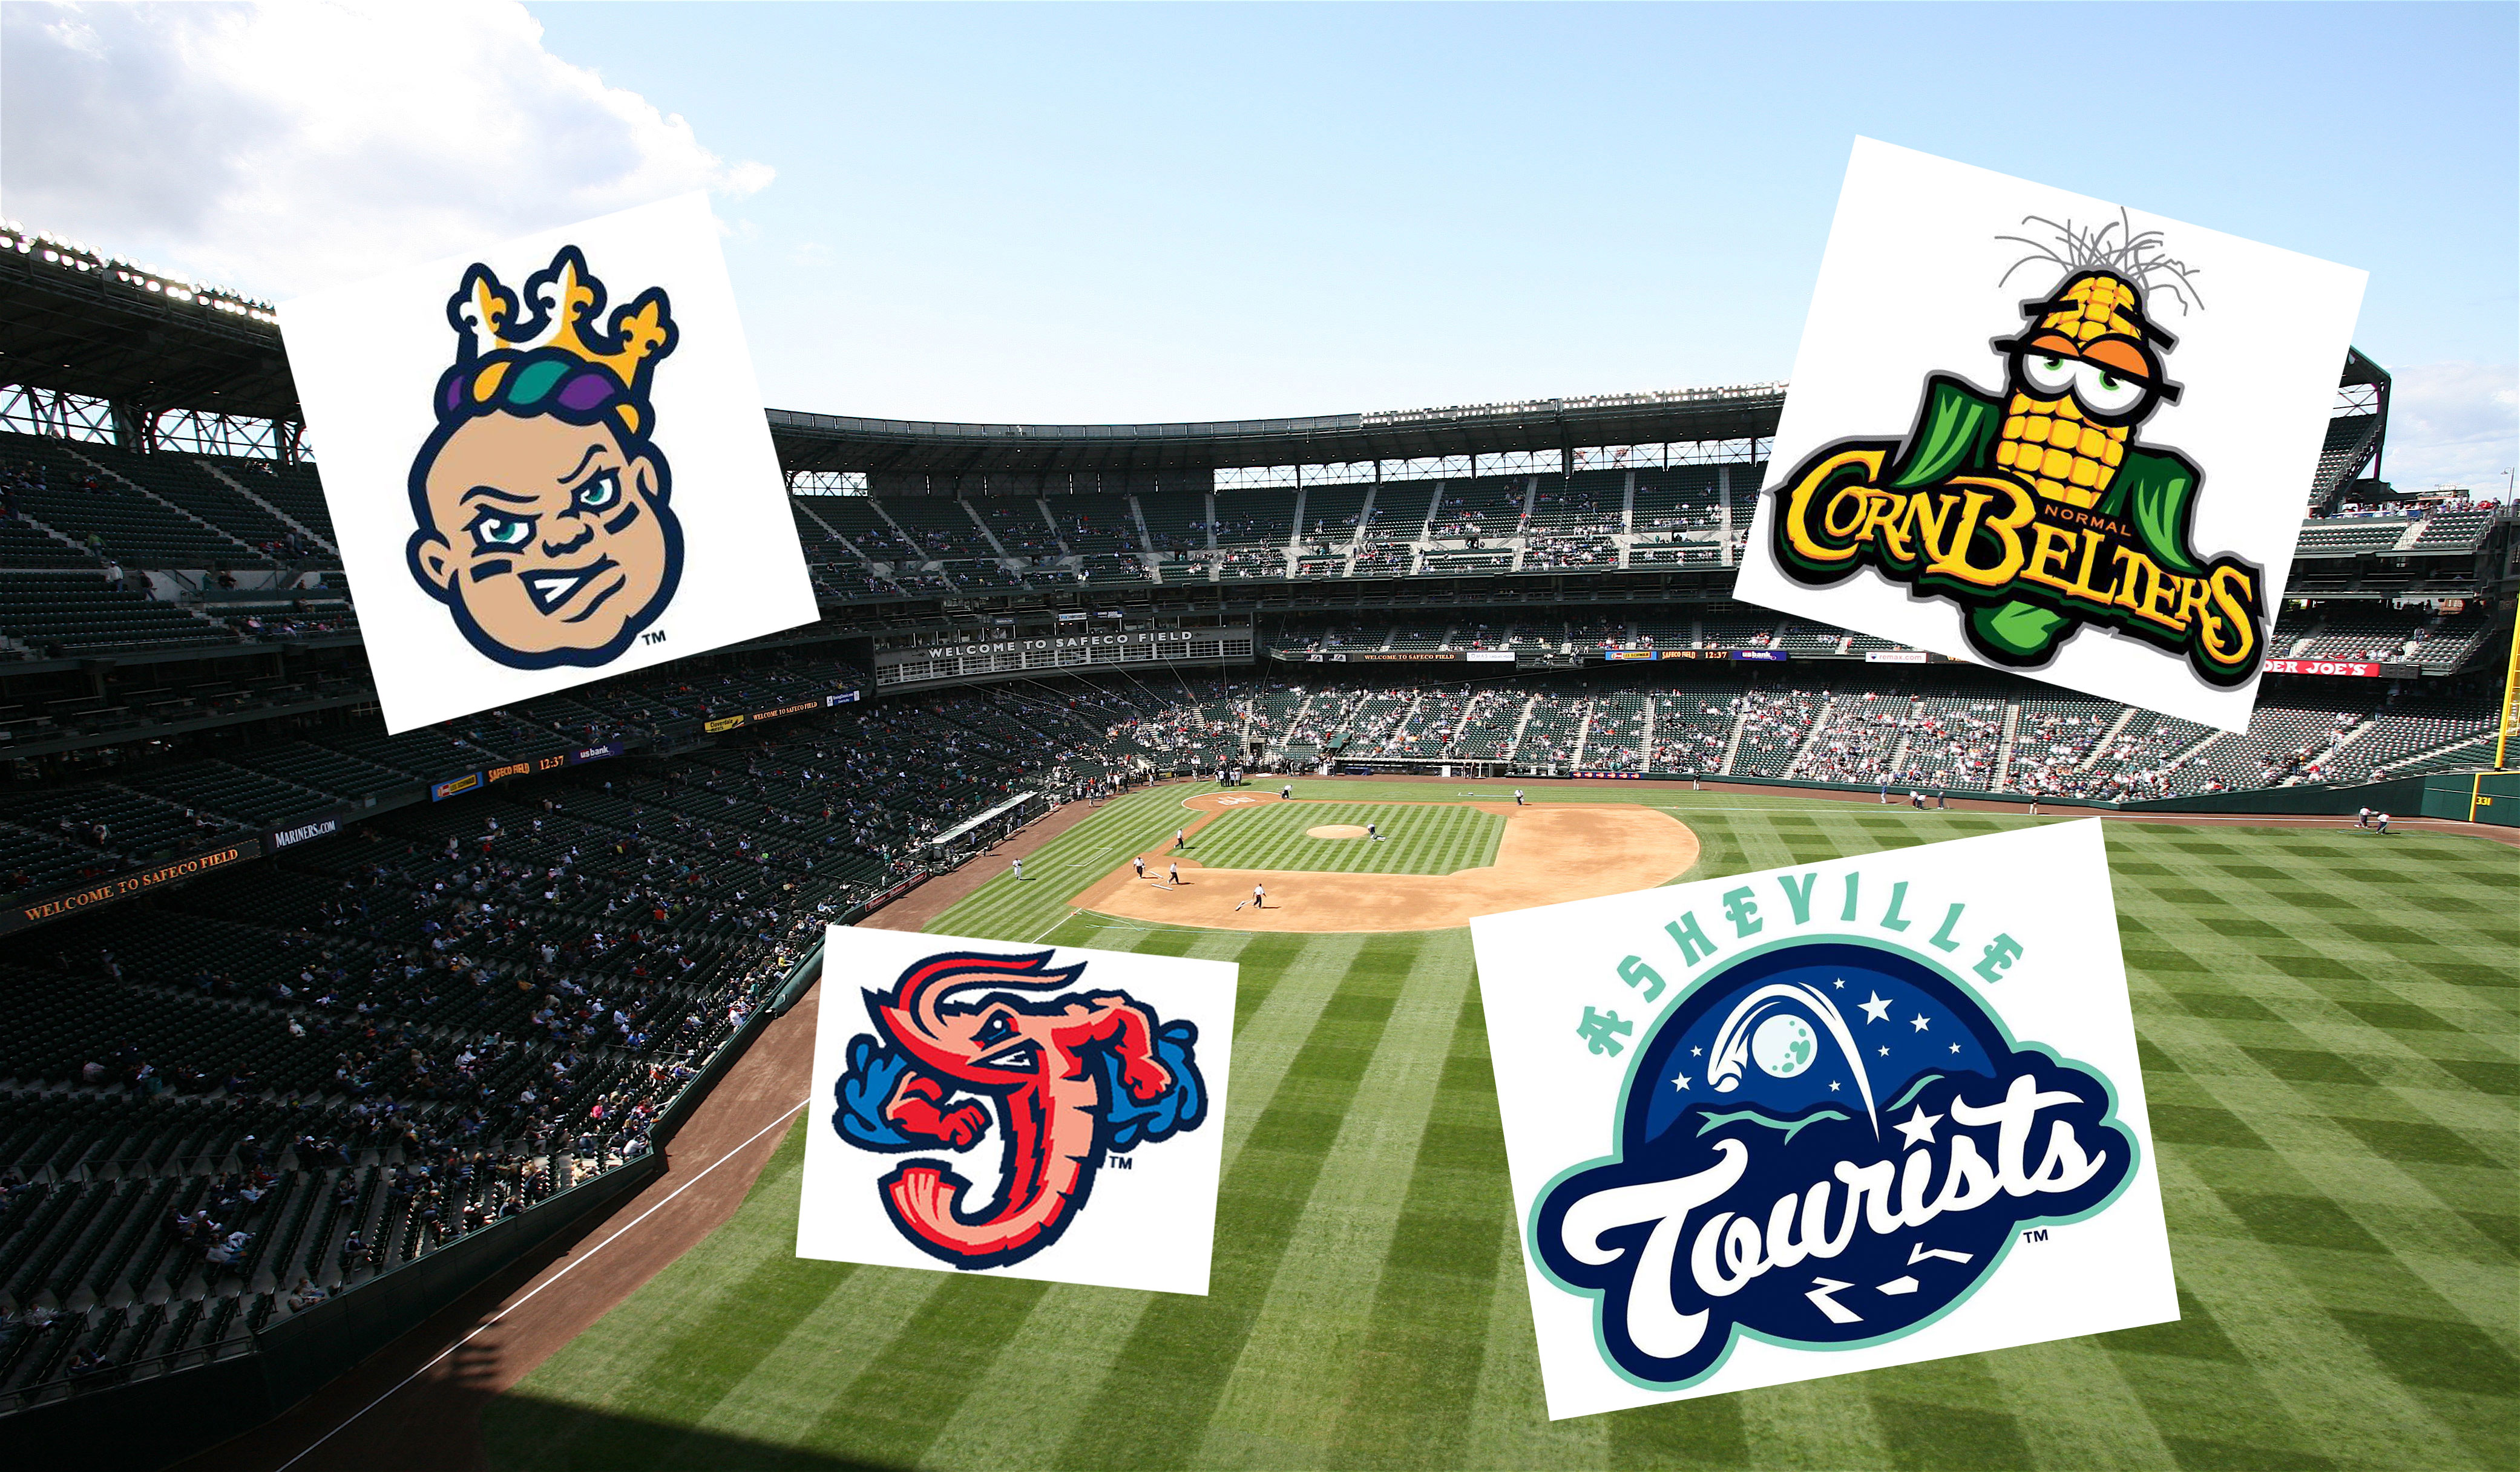 Best minor league baseball team names: From the wacky to the bold